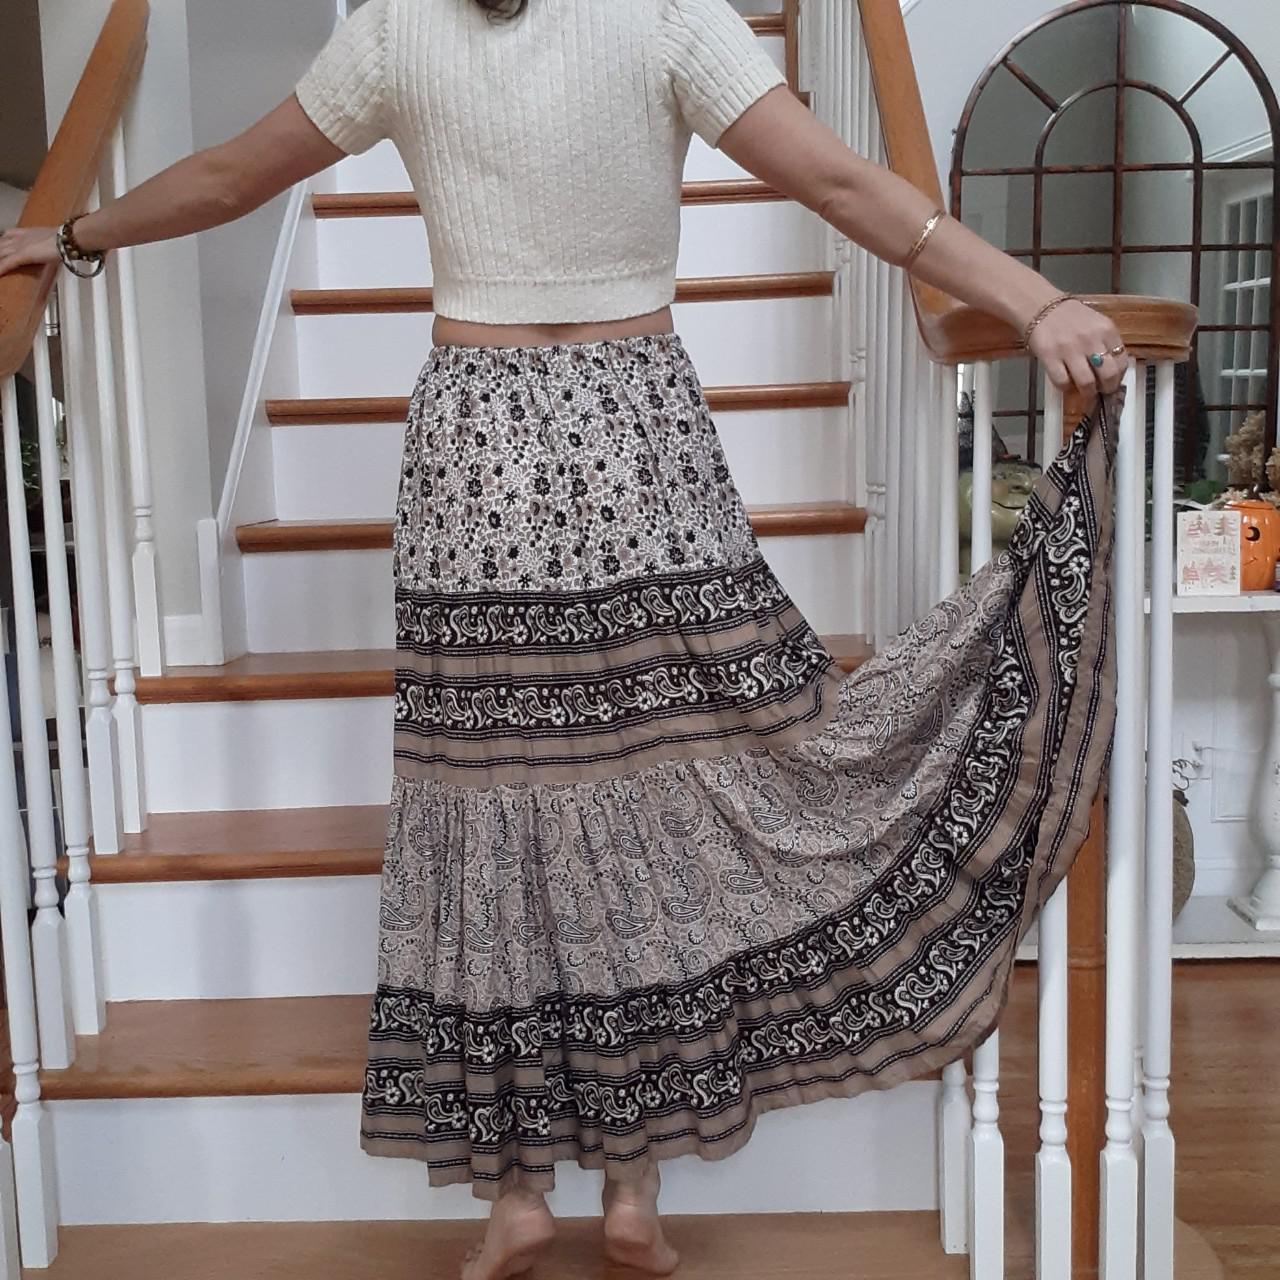 Product Image 4 - Boho brown Maxi skirt
The hippy